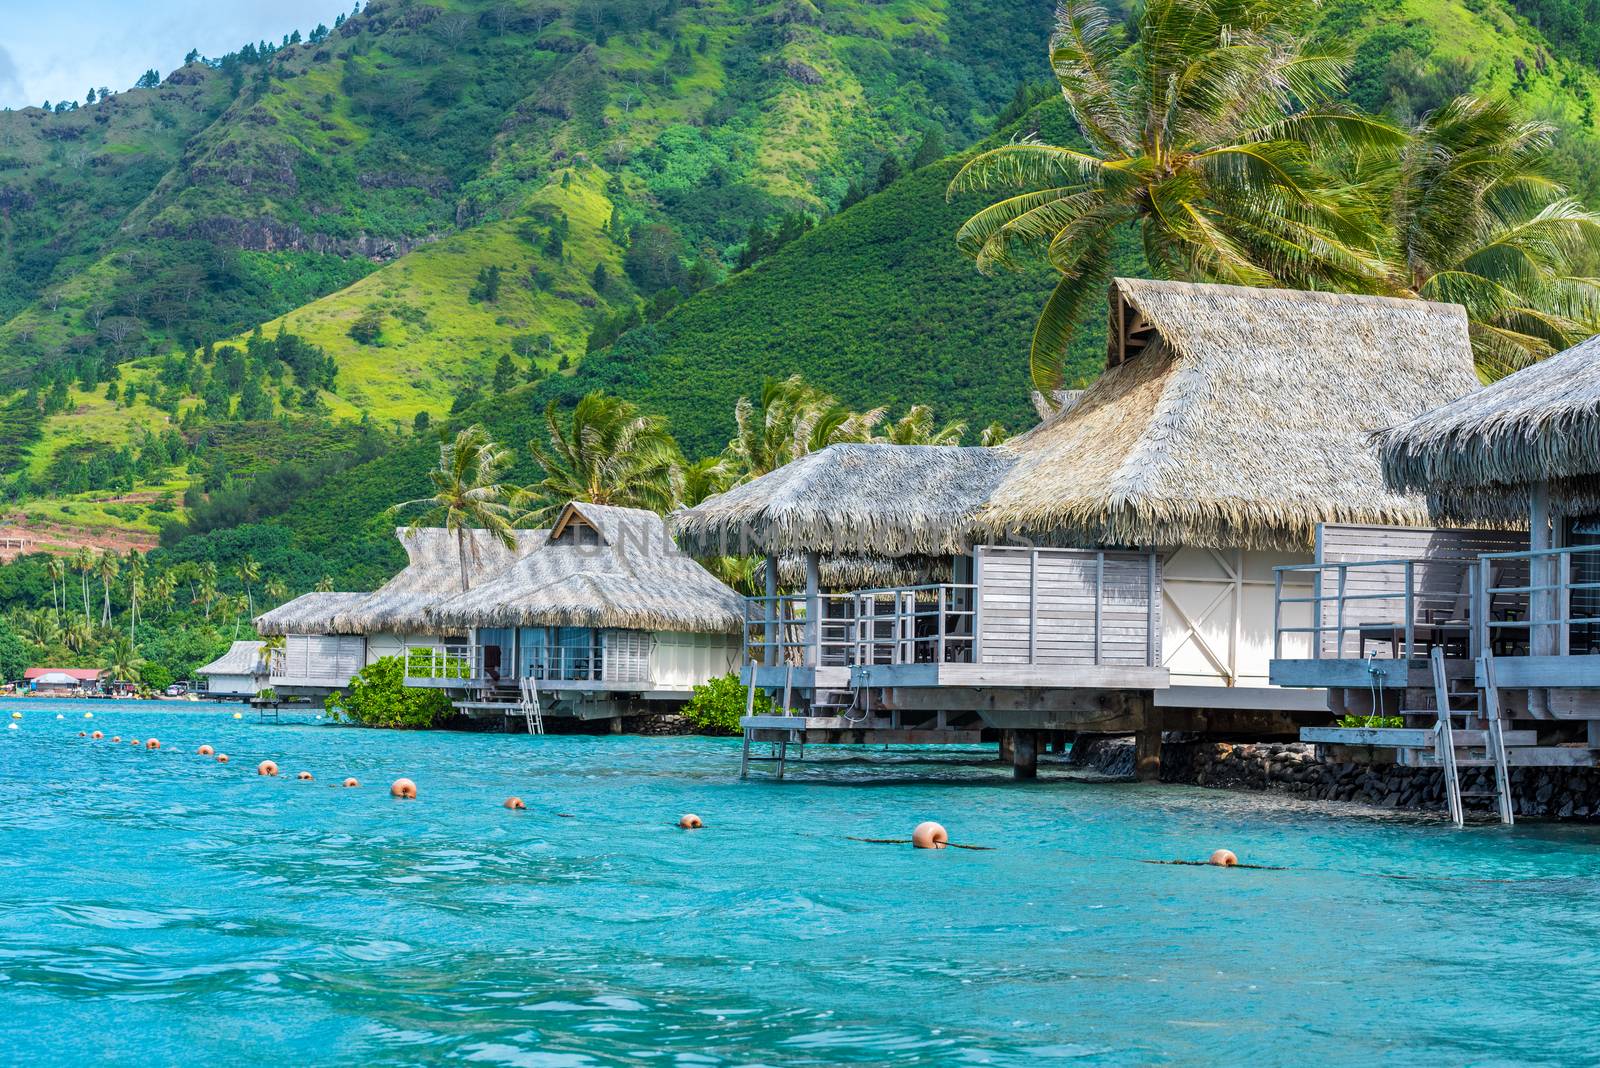 Thatched roof houses on a lagoon in Moorea Island in the South Pacific. Green mountains in the background.